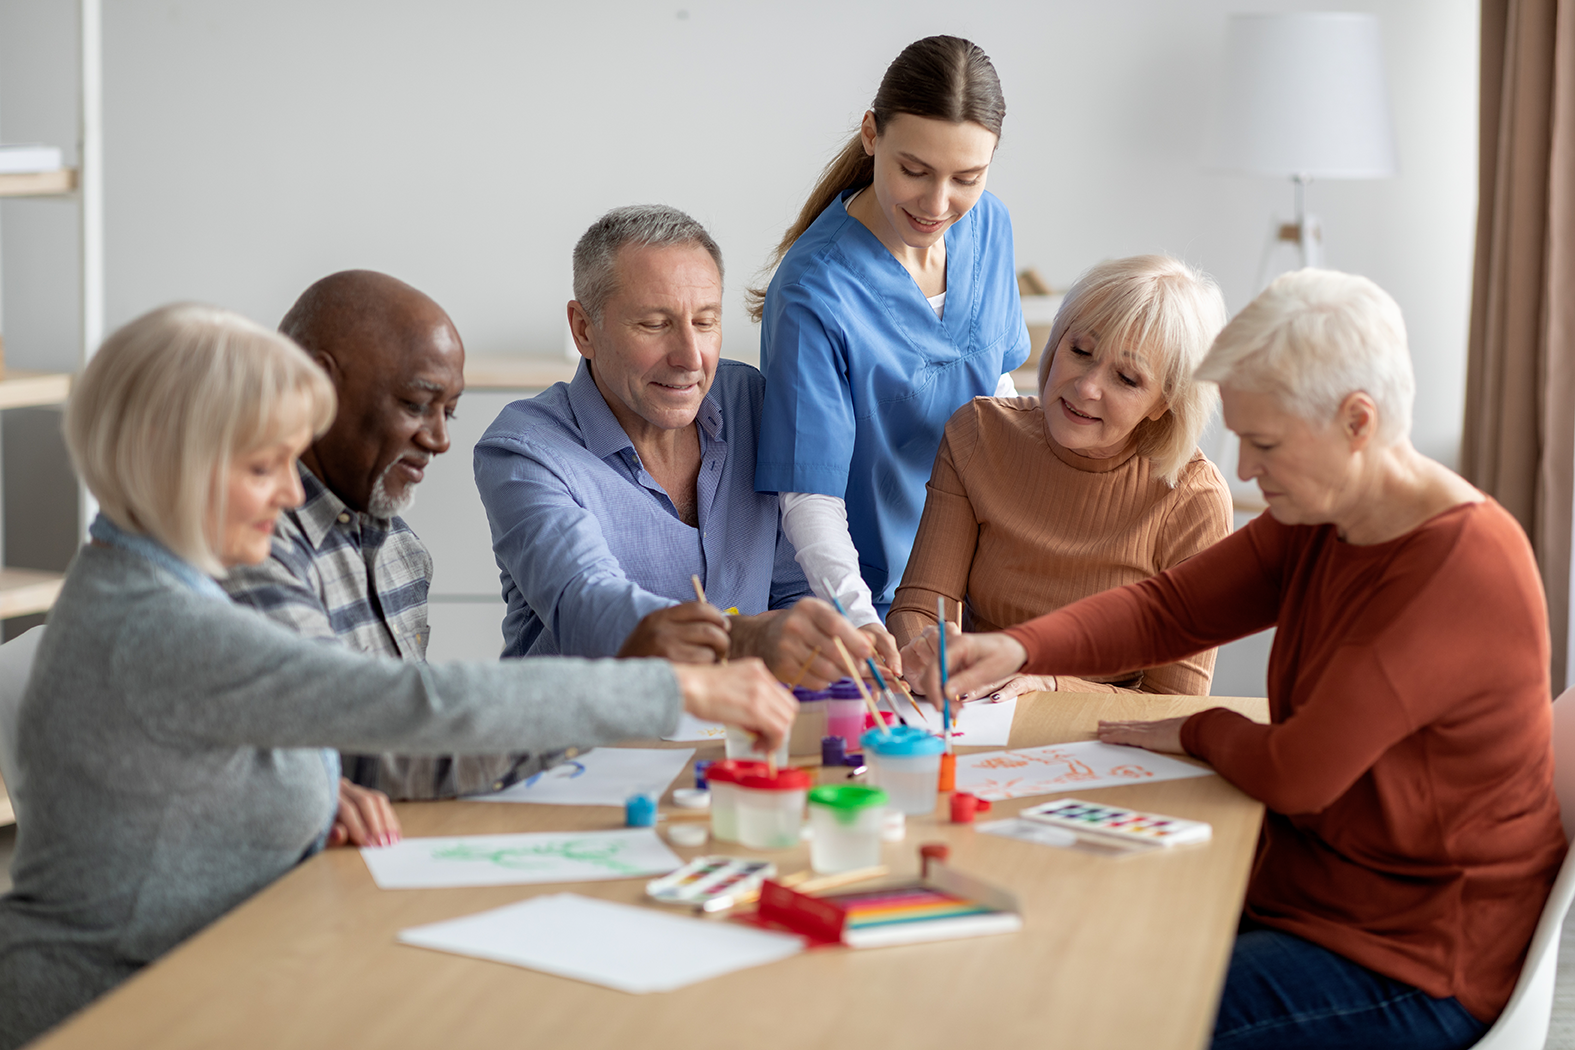 Adult social care policies and procedures: ComplyPlus™